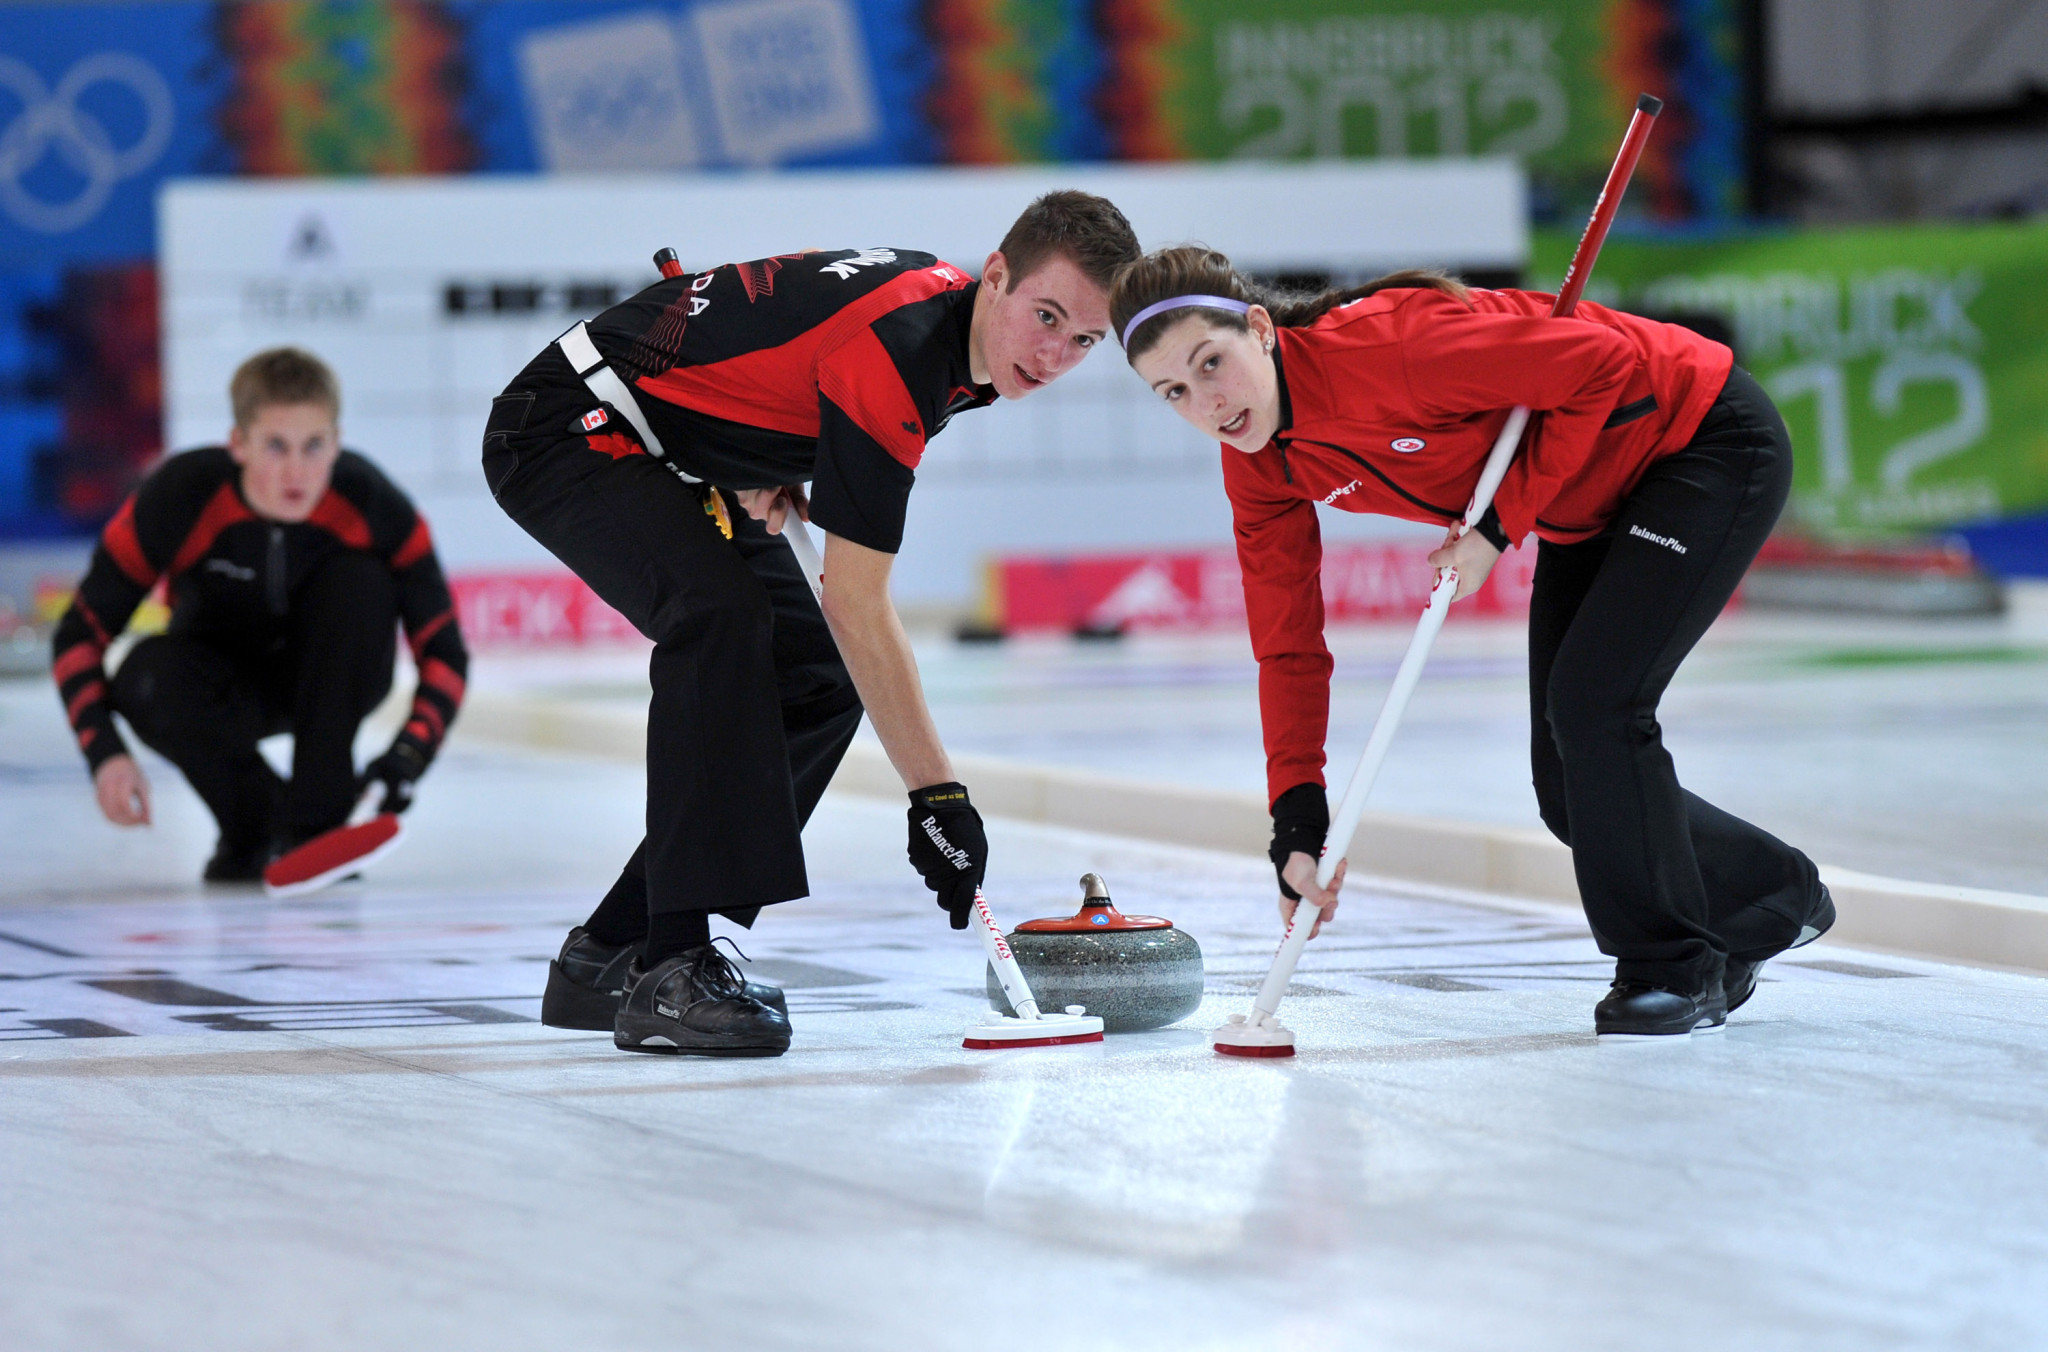 World Mixed Curling Championships poised to begin in Canada